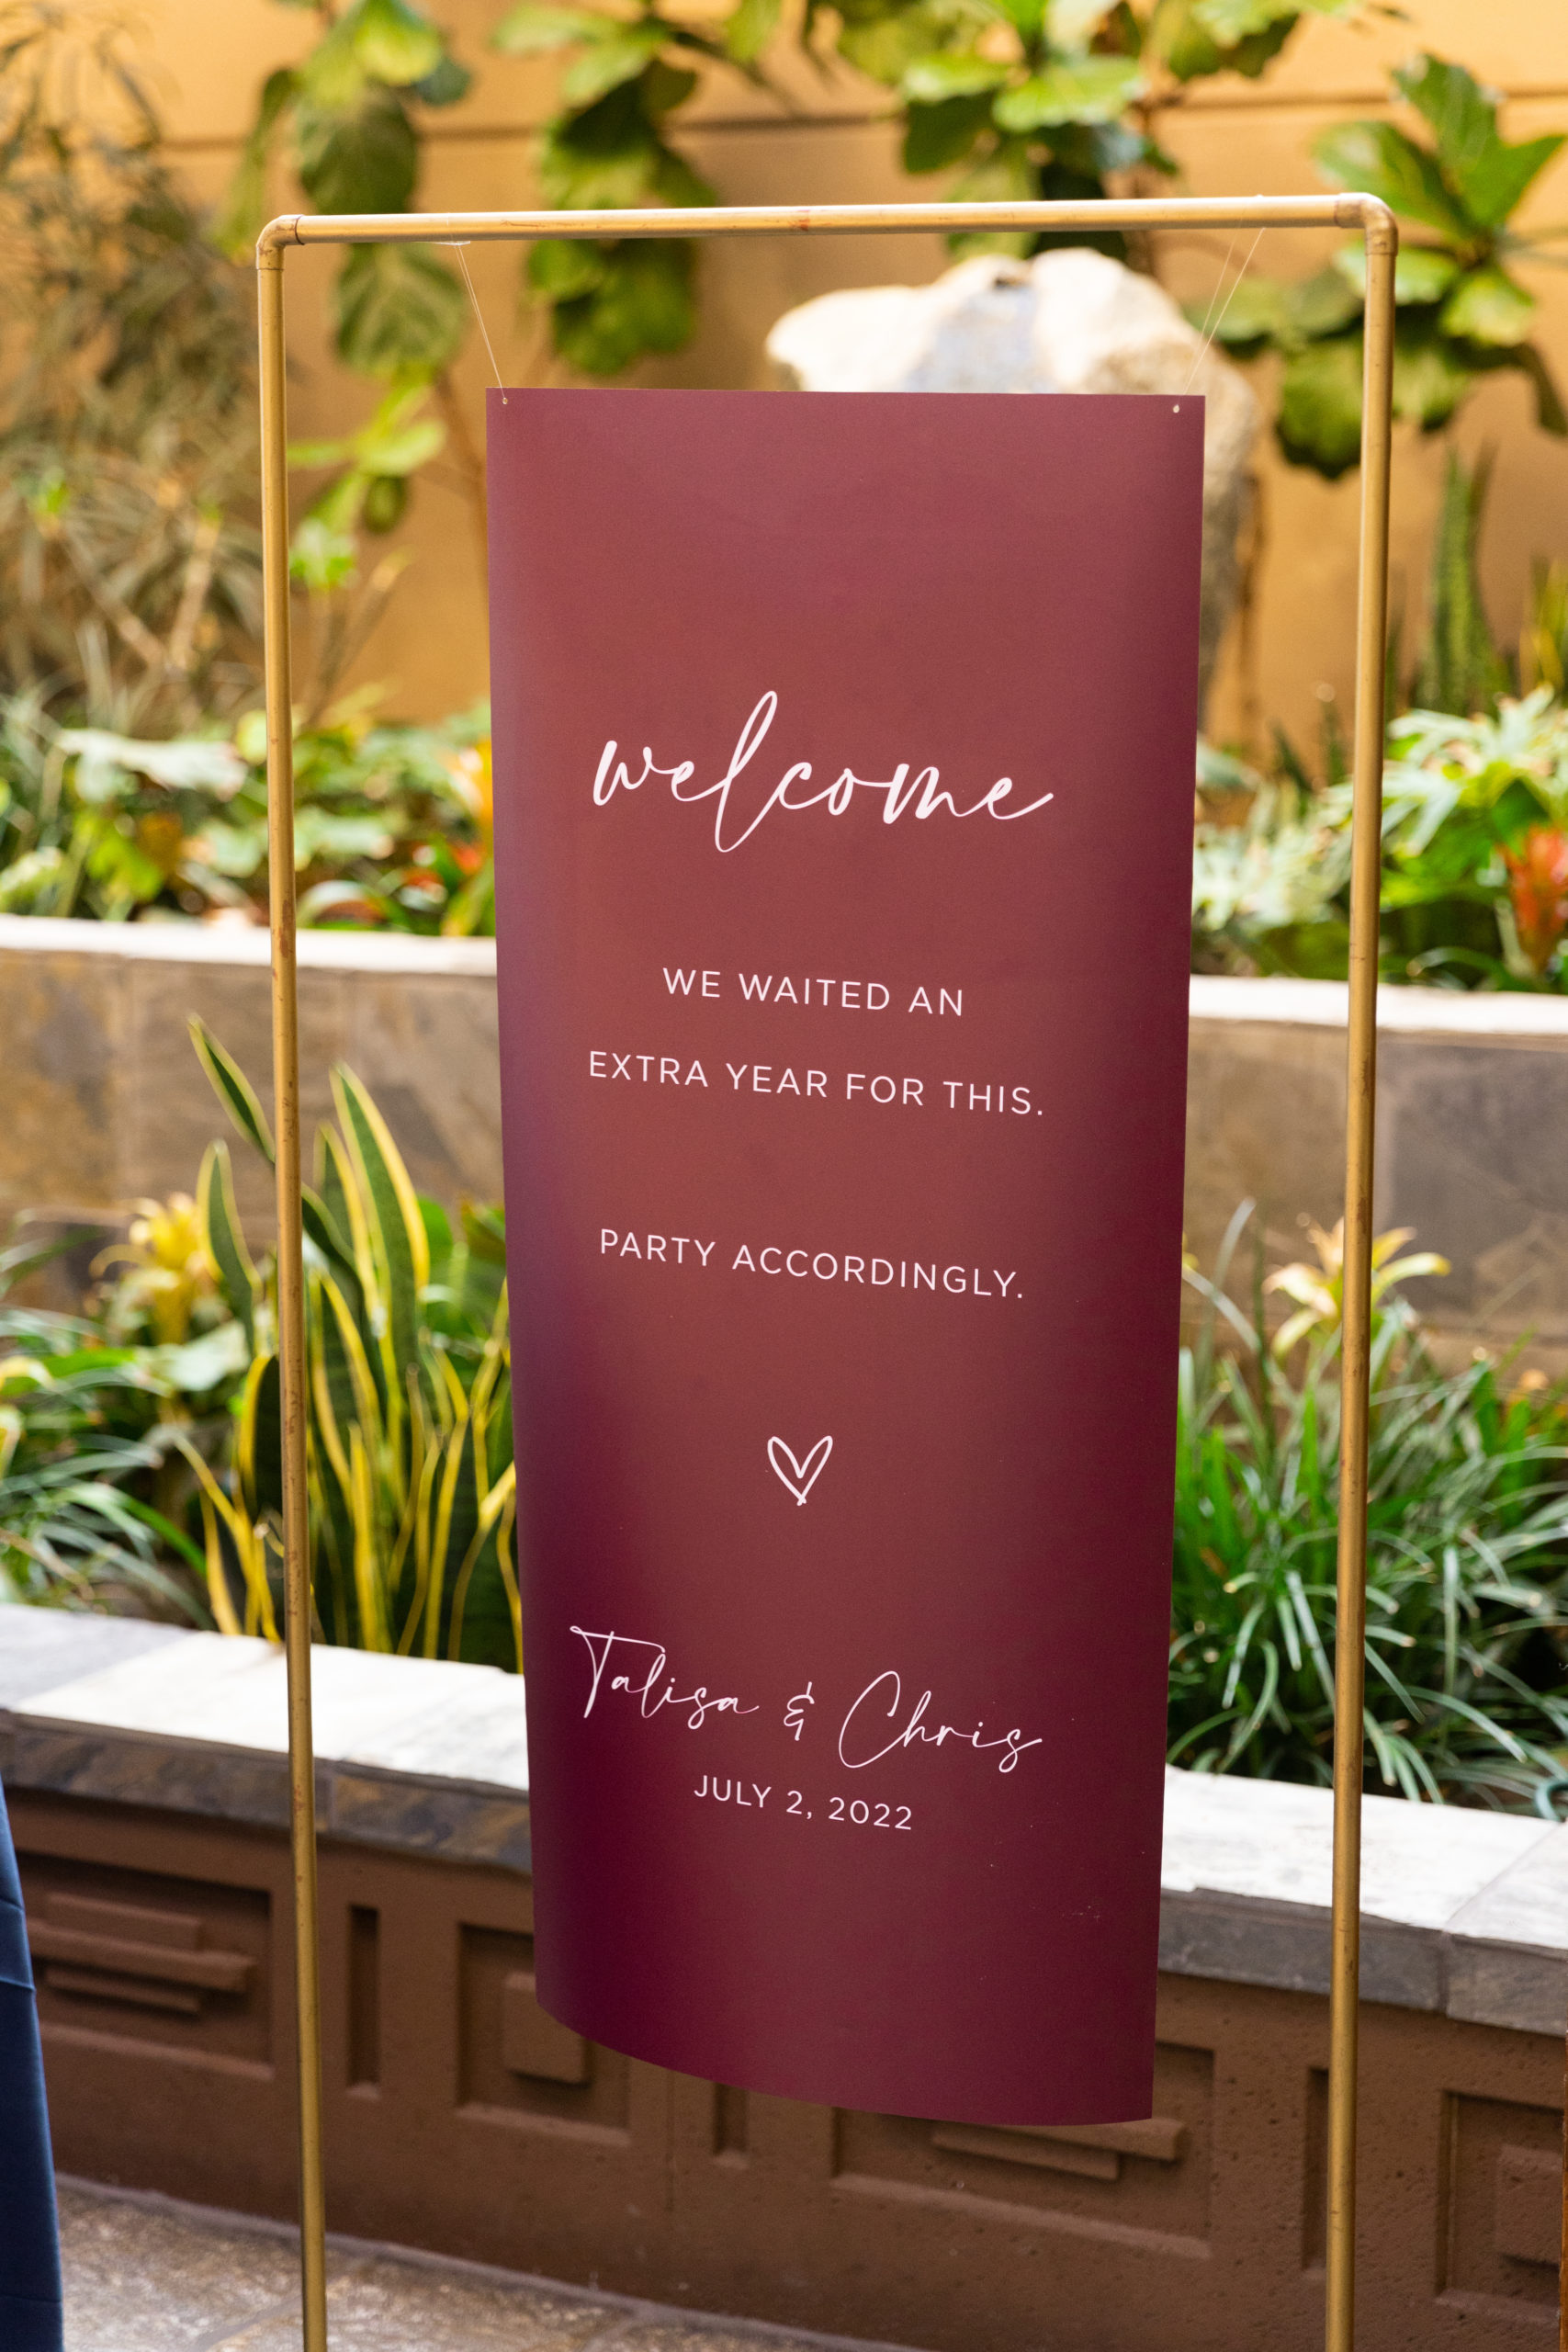 maroon postponed wedding welcome sign that reads "We waiting an extra year for this. Party accordingly"